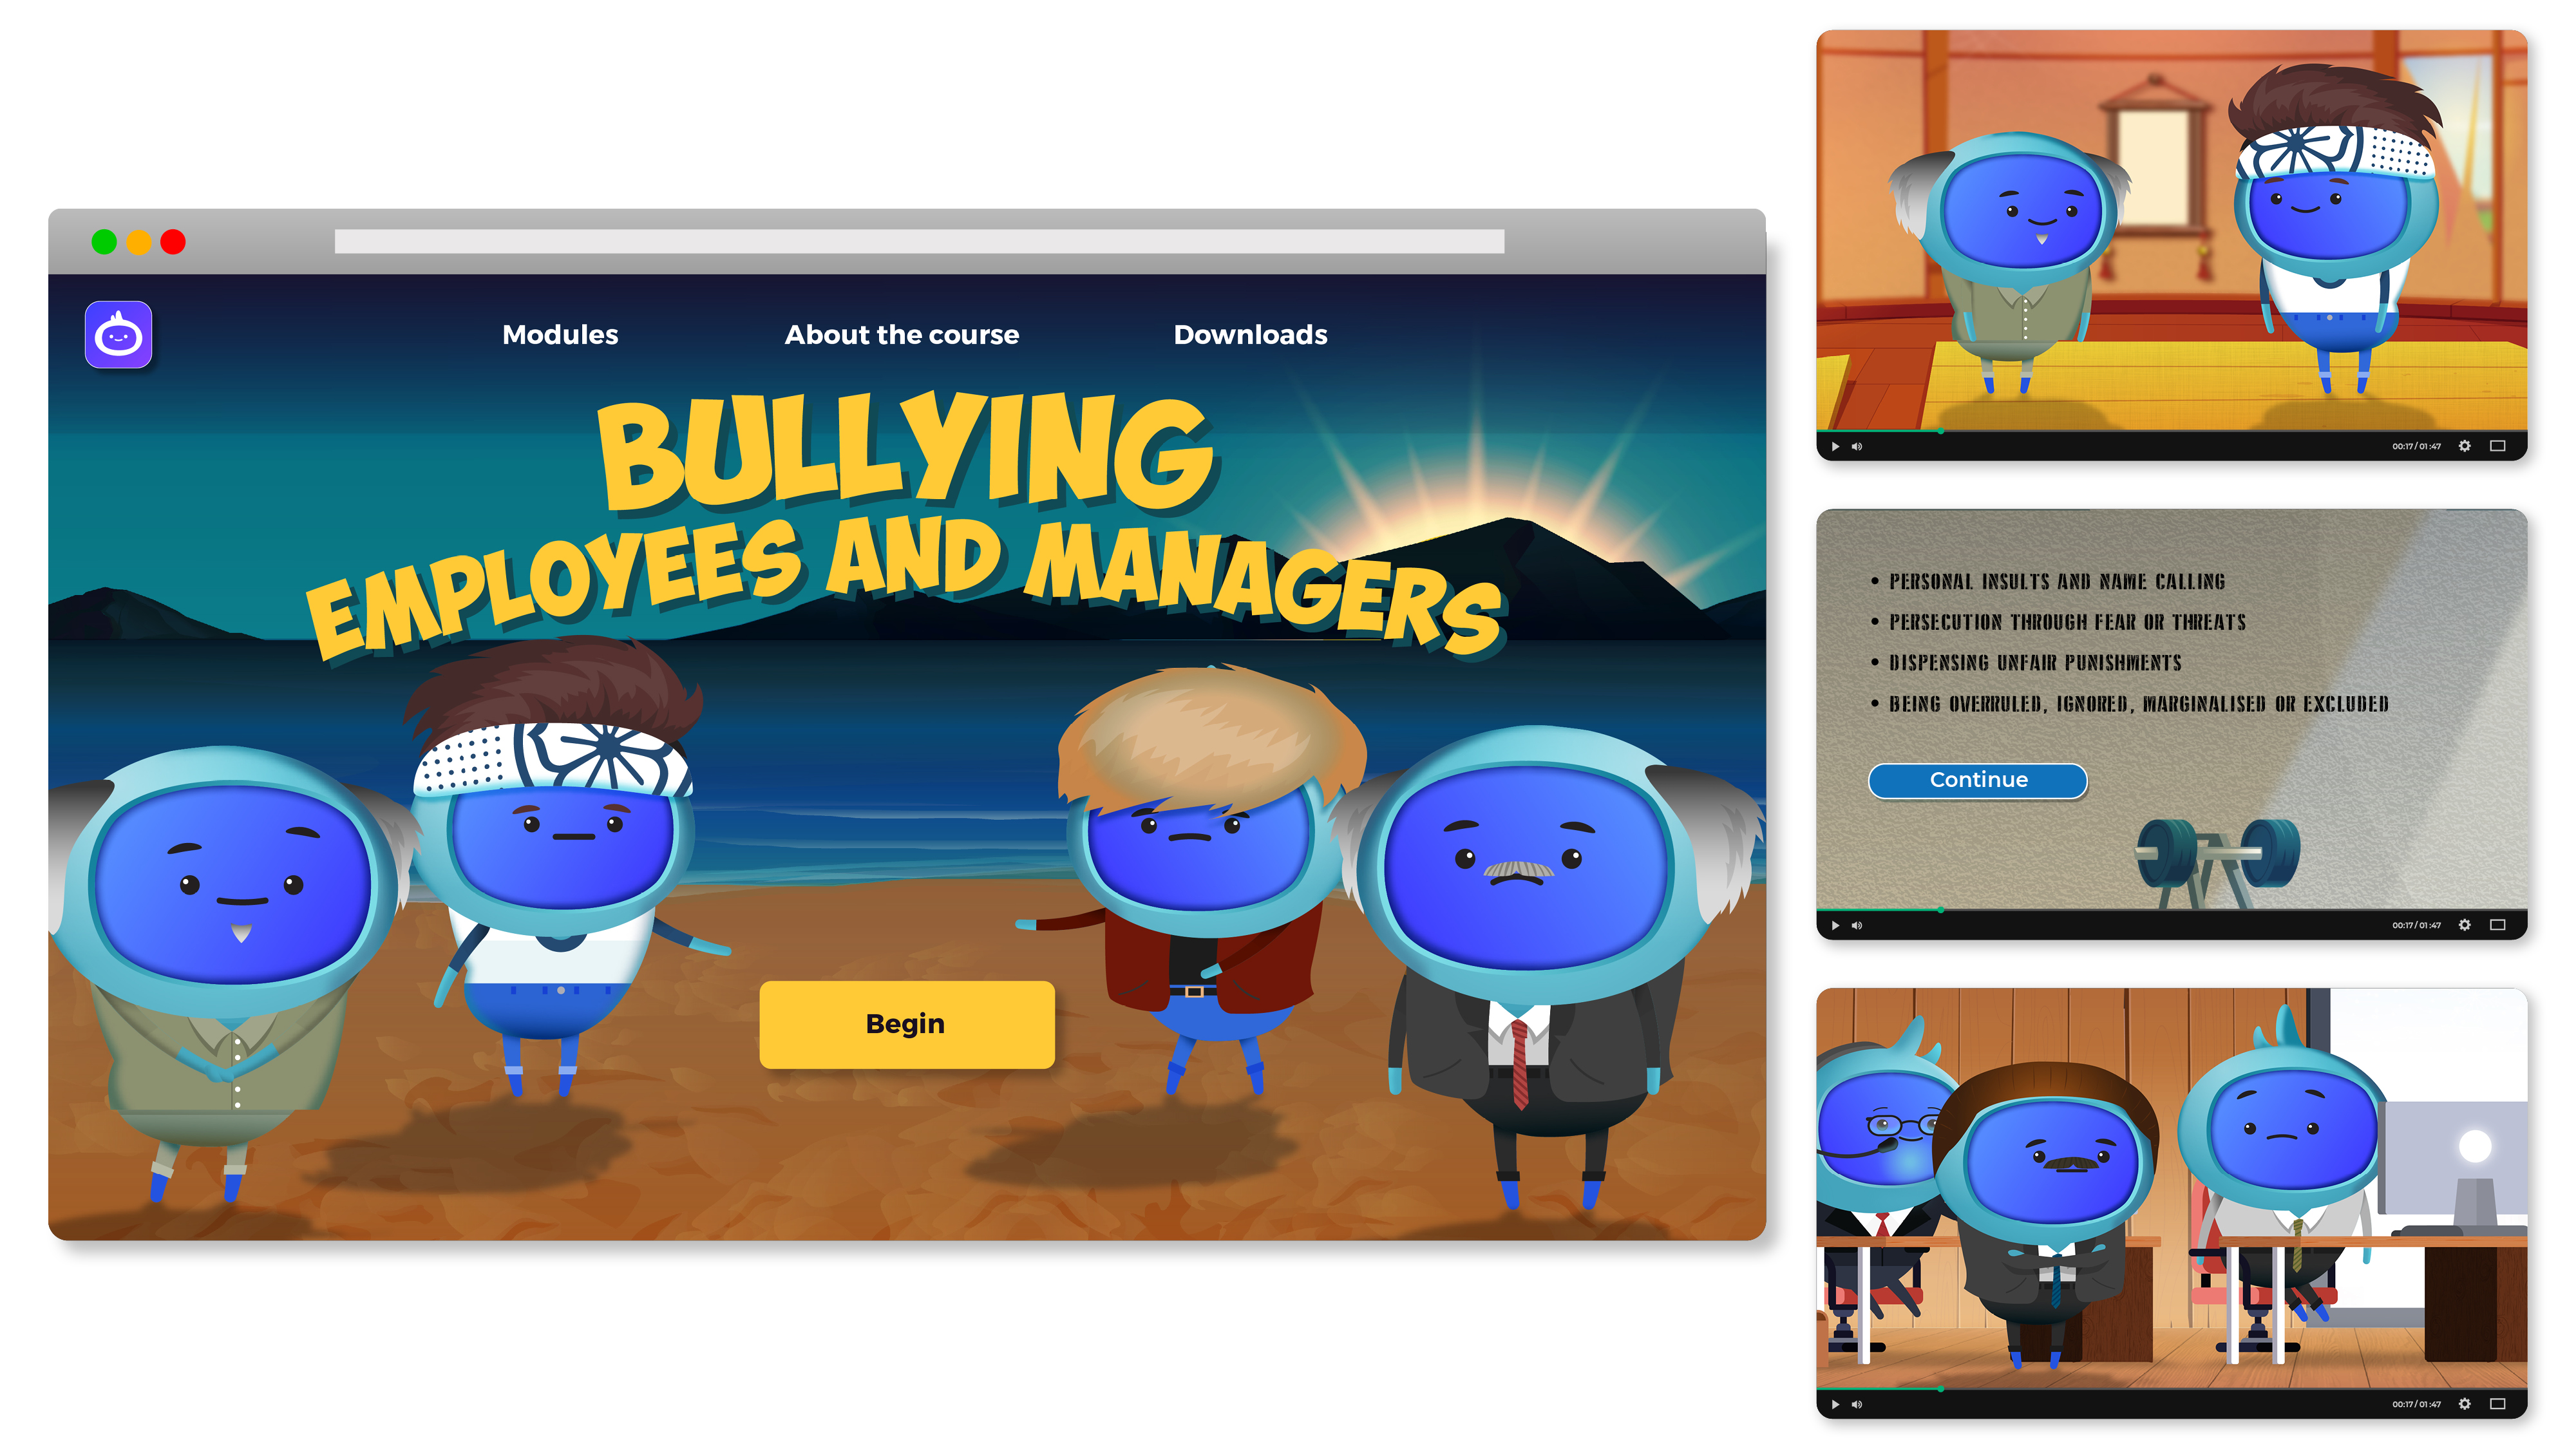 iAM Bullying Employees and Managers - Landing Page